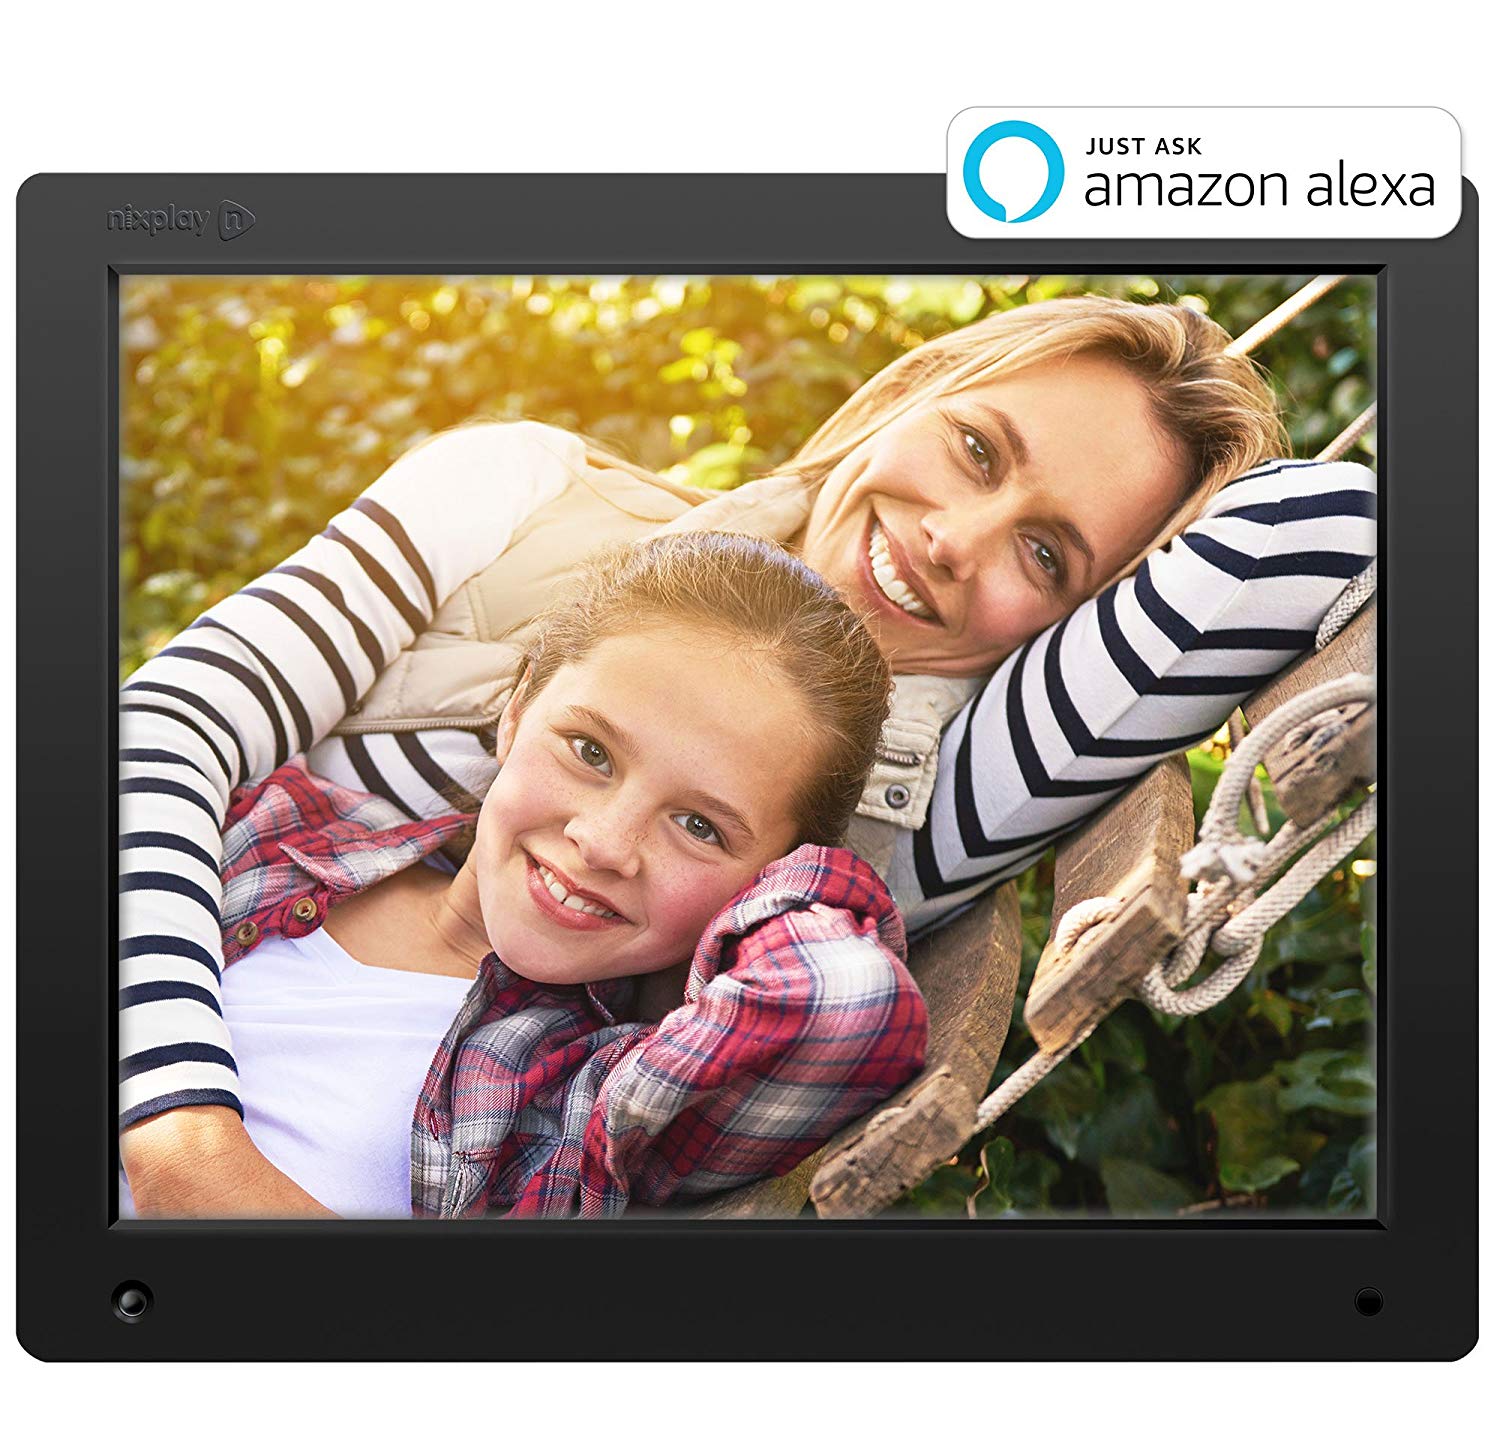 Best Digital Photo Frames 2019 - Best Digital Picture Frame With Wifi